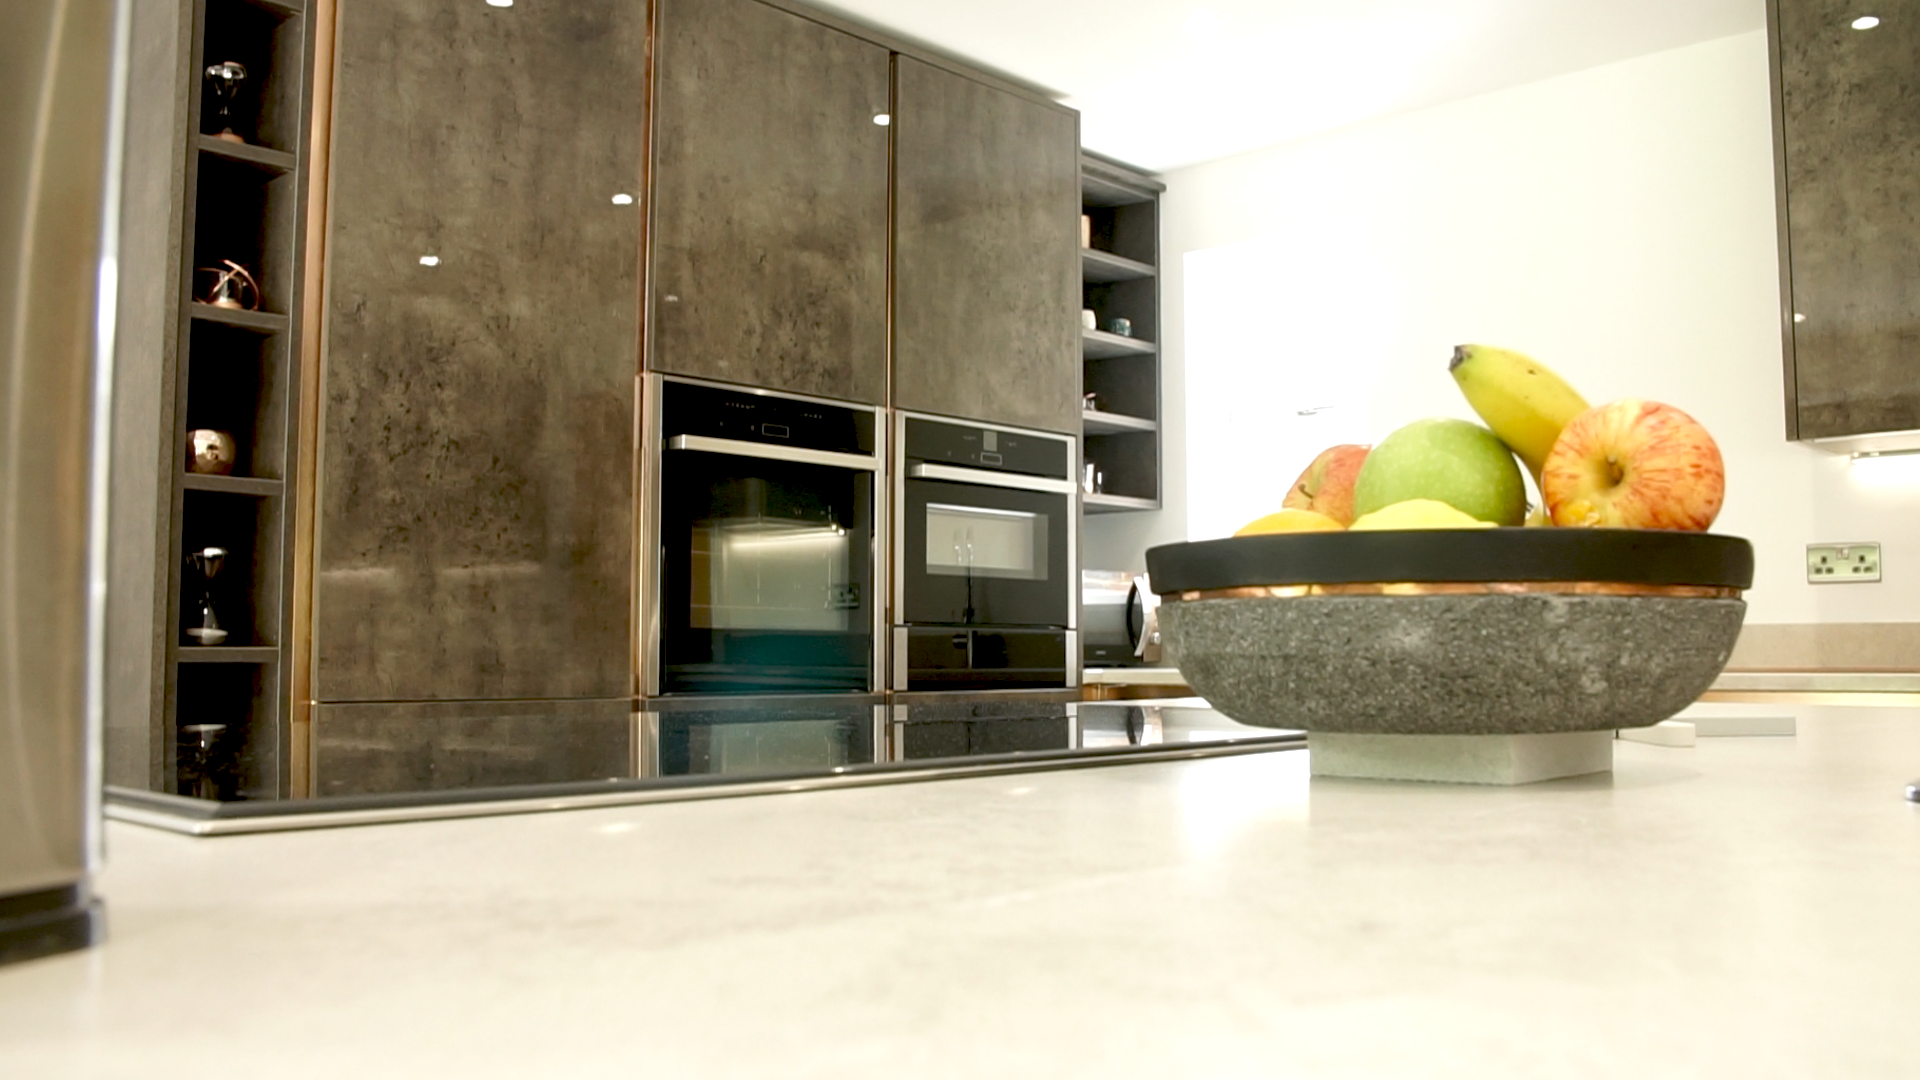 Image of a refurbished kitchen in Basingstoke with a fruit bowl in the foreground and the new cupboards in the background